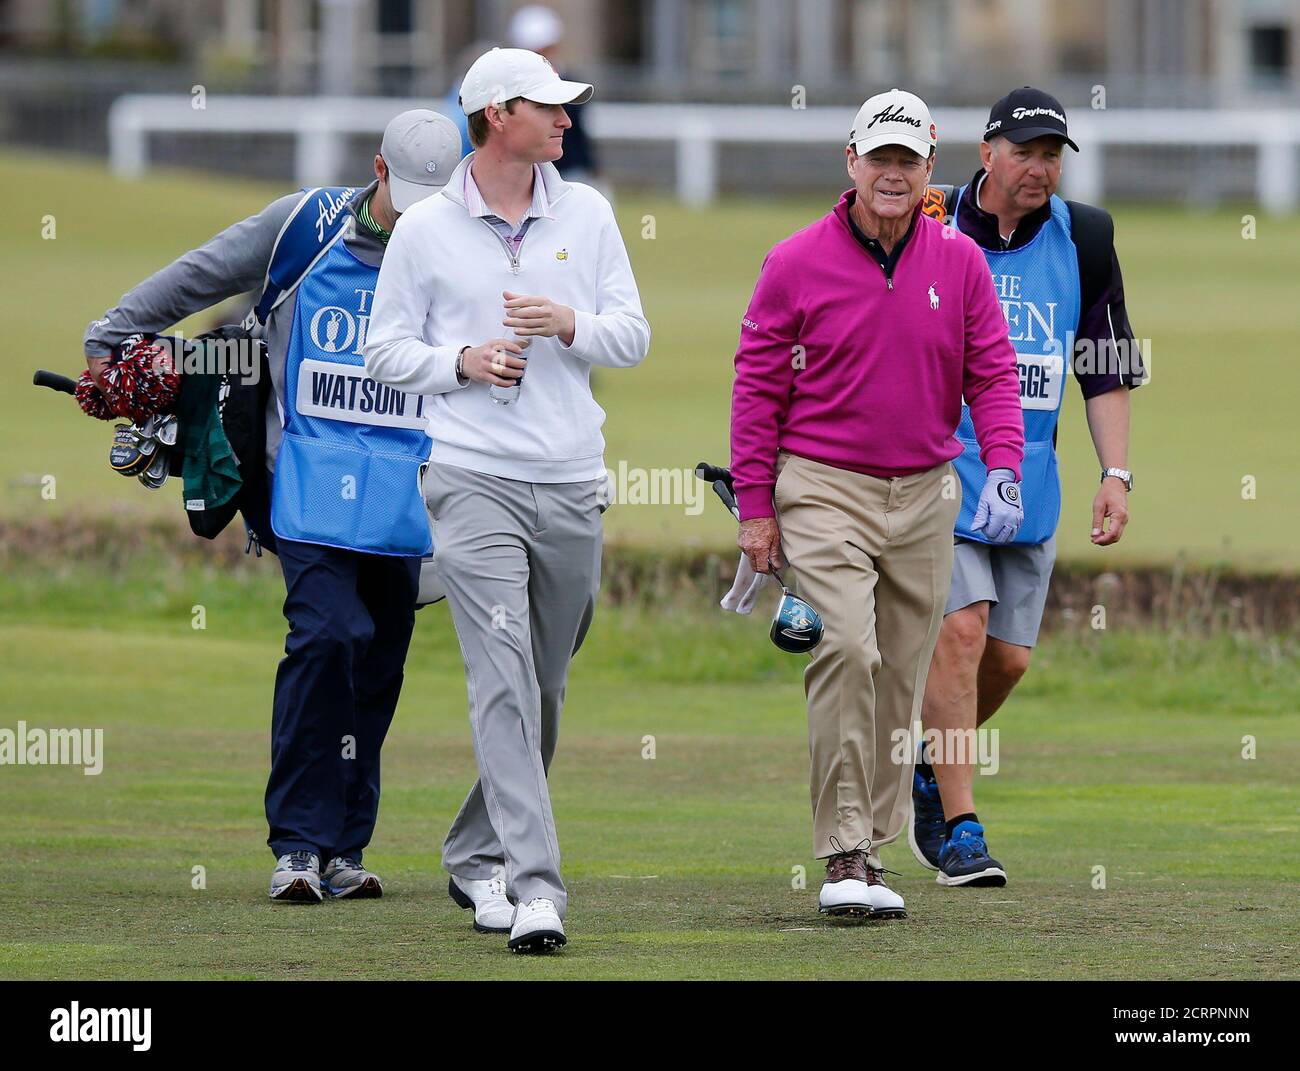 Tom Watson (2nd R) of the U.S. with Jordan Niebrugge of the U.S. during a practice round ahead of the British Open golf championship on the Old Course in St. Andrews, Scotland, July 13, 2015.  REUTERS/Paul Childs Stock Photo